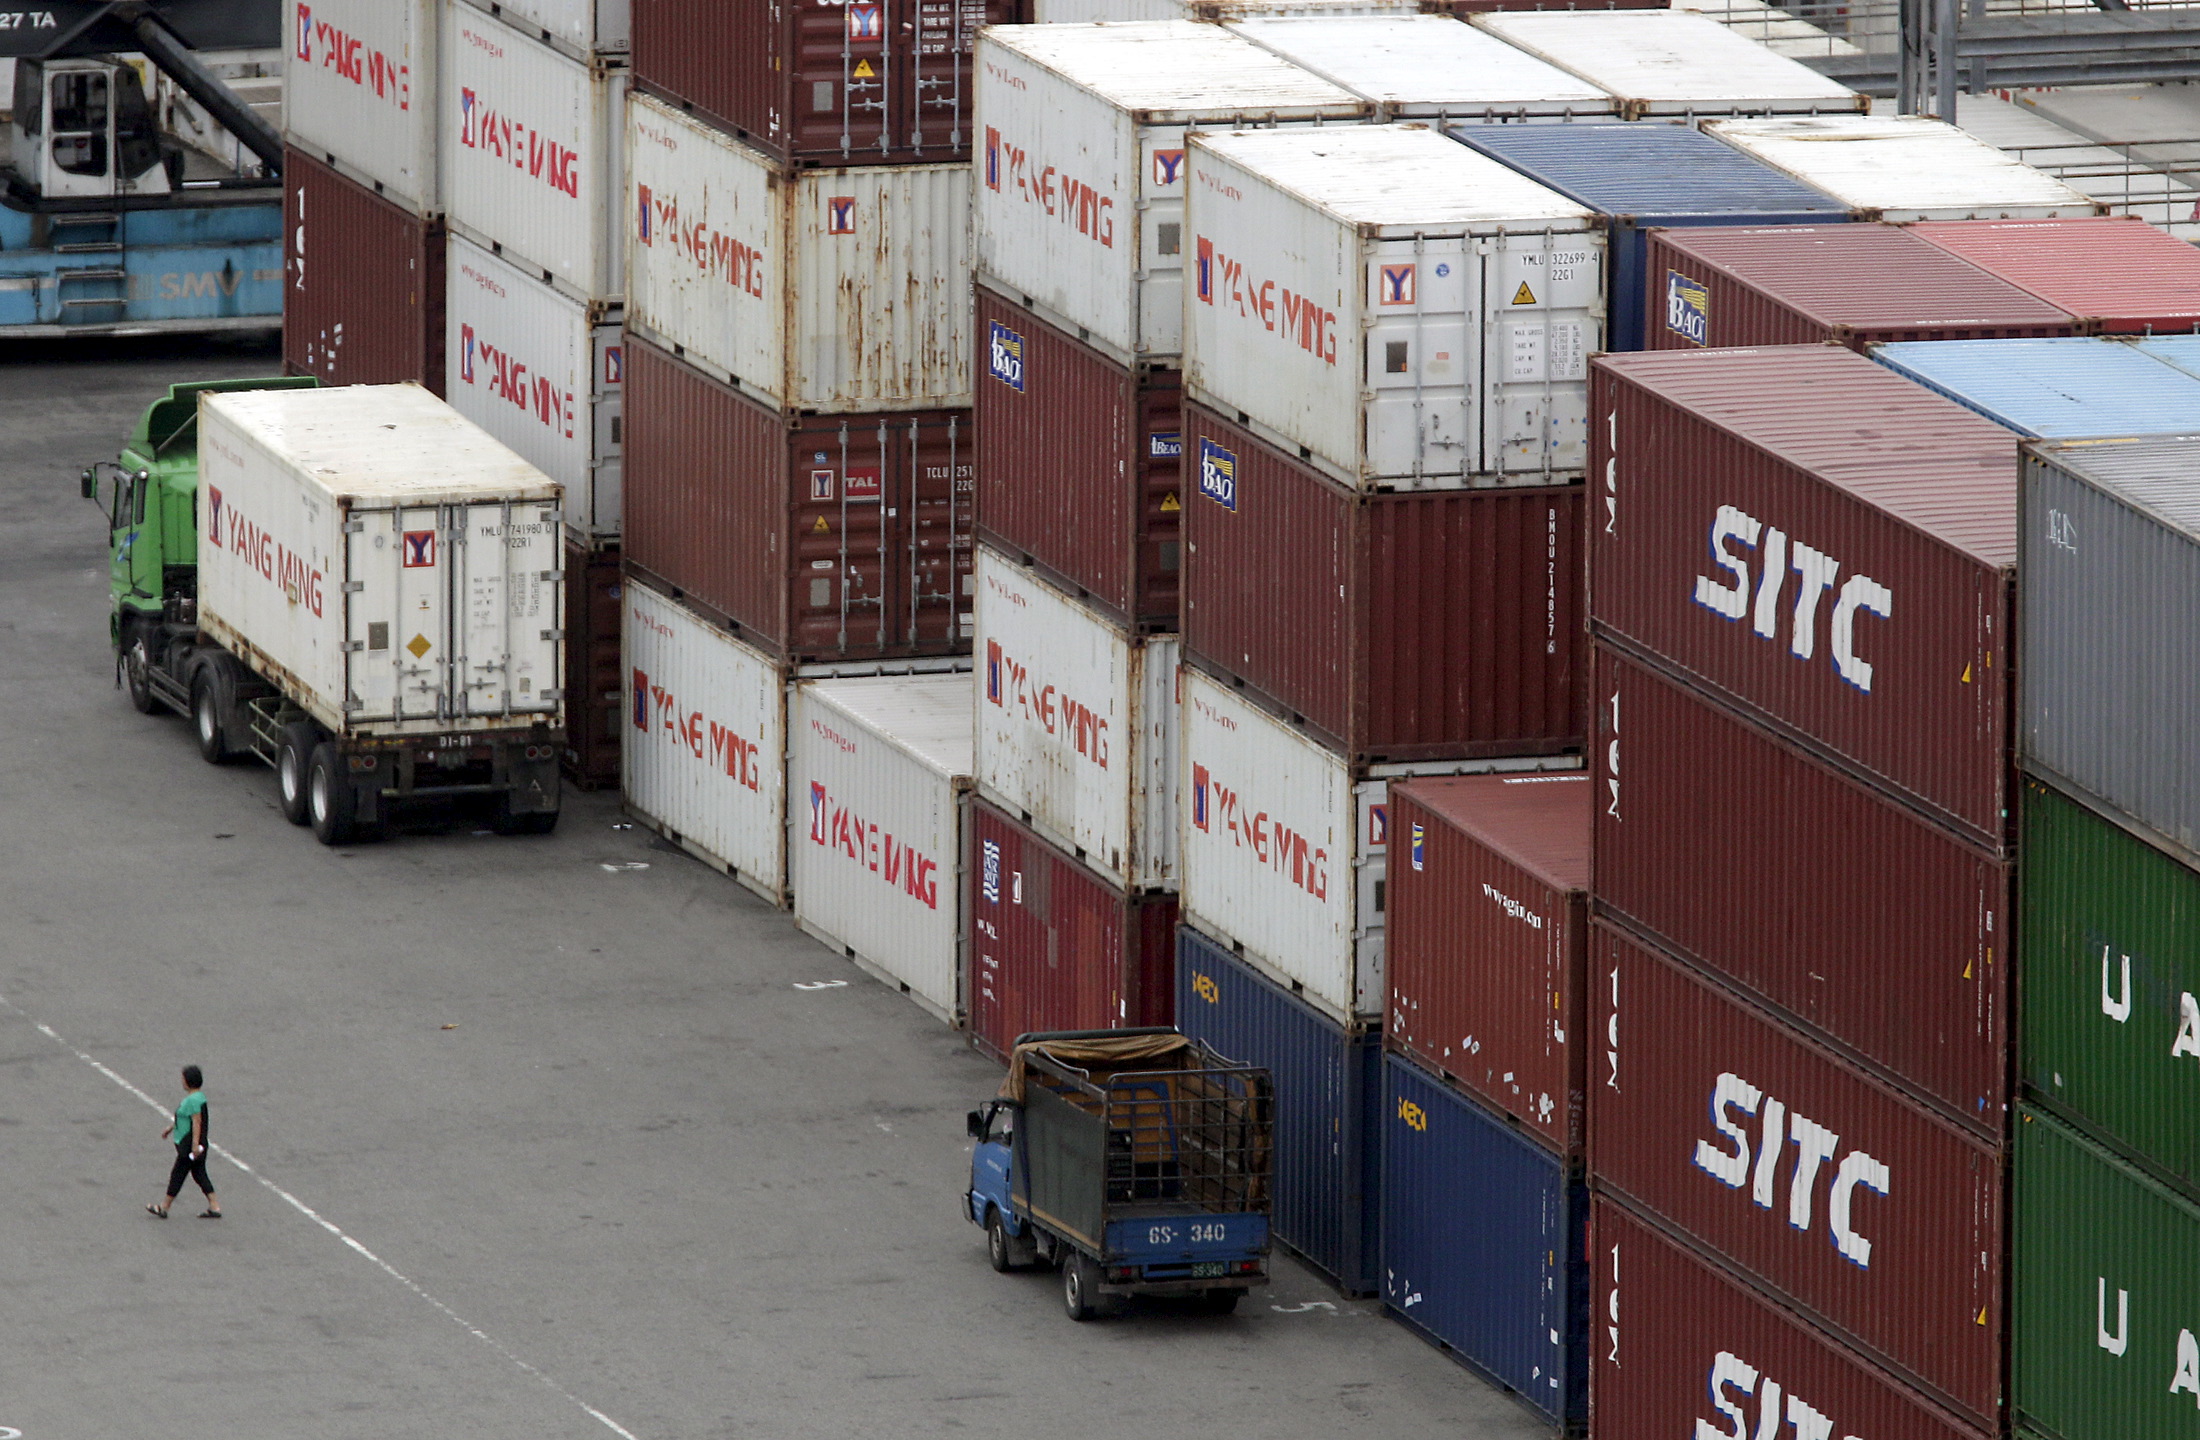 A person walks near containers at Keelung port, northern Taiwan